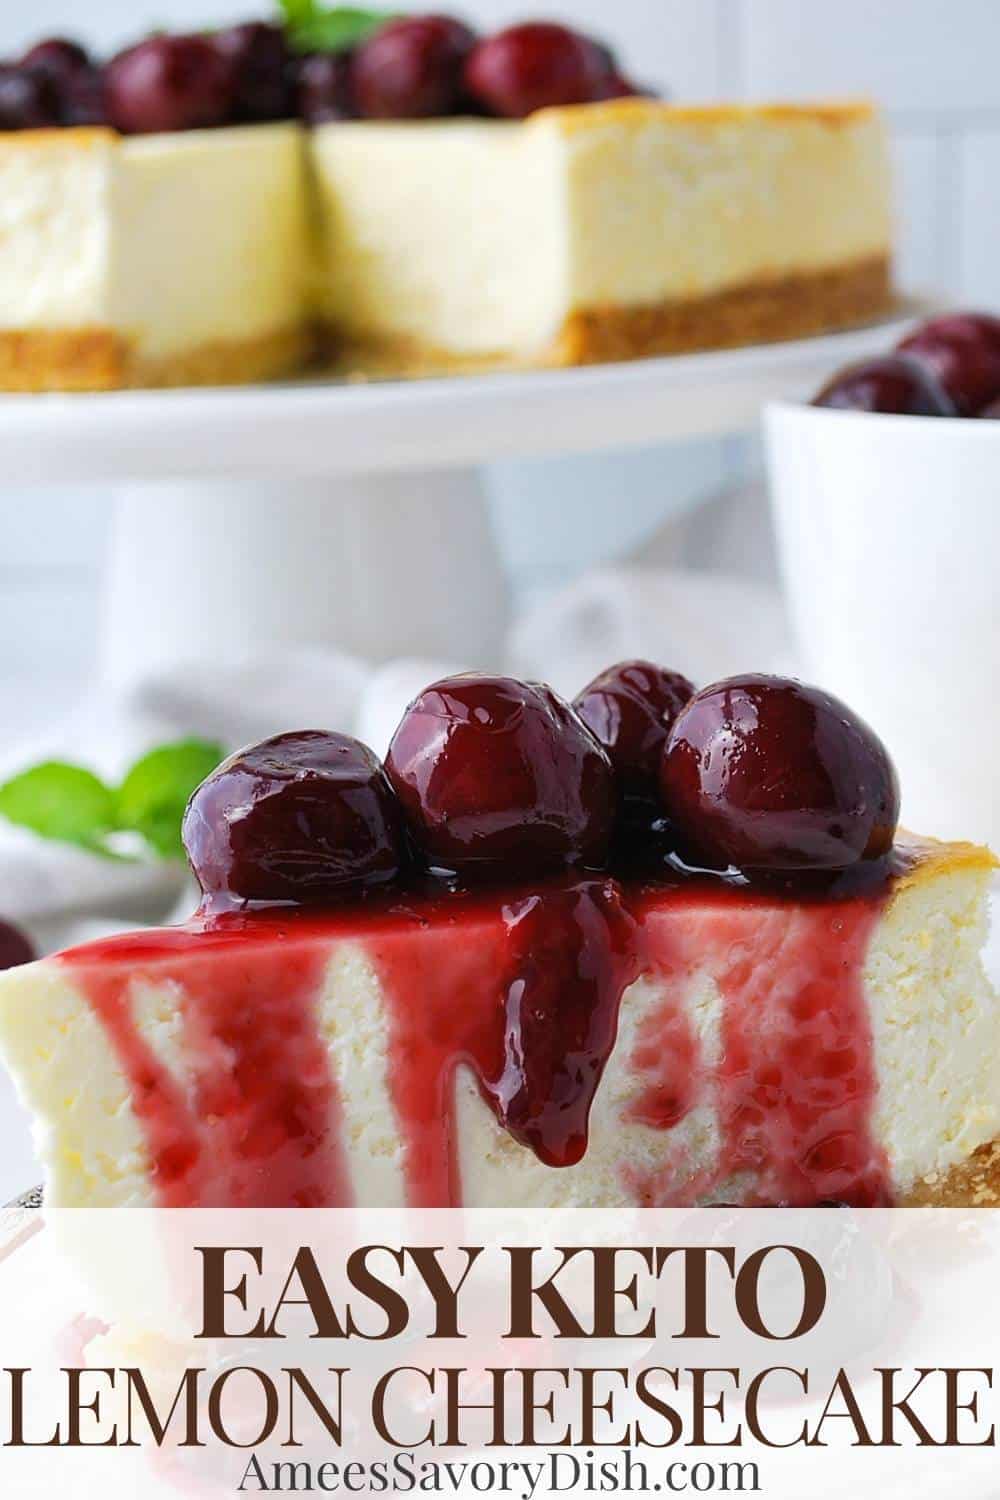 This Keto Lemon Cheesecake recipe cuts the carbs without sacrificing flavor or texture. A smooth, custardy lemon cheesecake filling is baked in a grain-free almond flour crust and adorned with a beautiful sugar-free cherry compote. via @Ameessavorydish